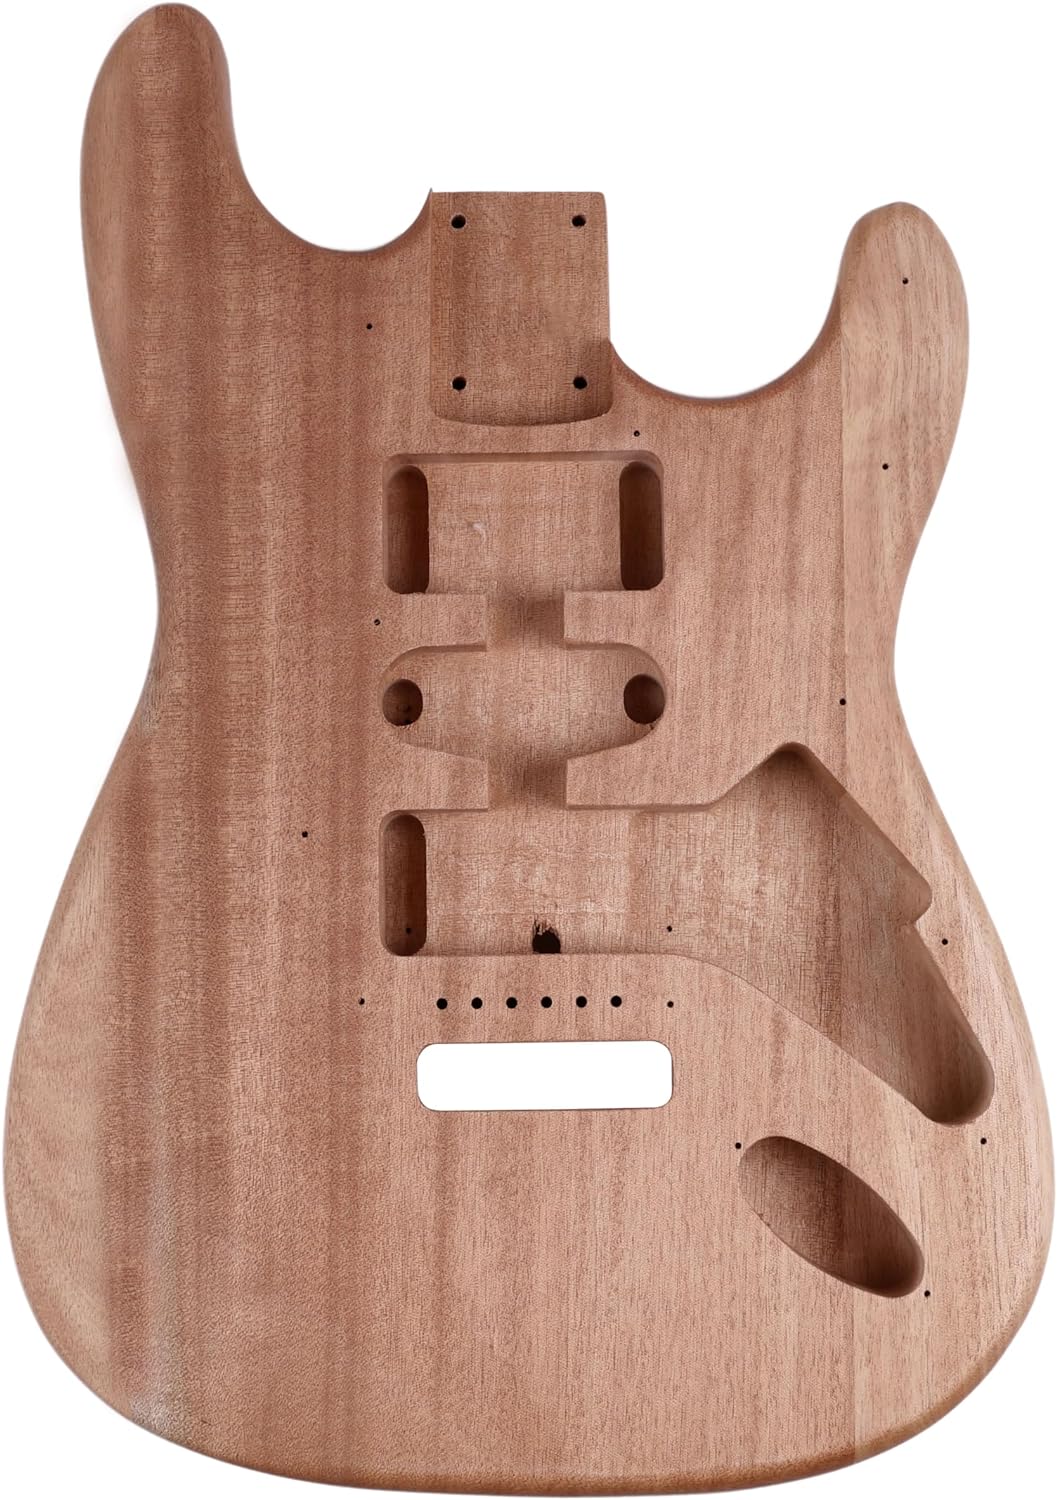 Leo Jaymz DIY ST Style Electric Guitar Kits with Mahogany Body and Maple Neck - Rosewood Fingerboard and All Components Included - image 4 of 6